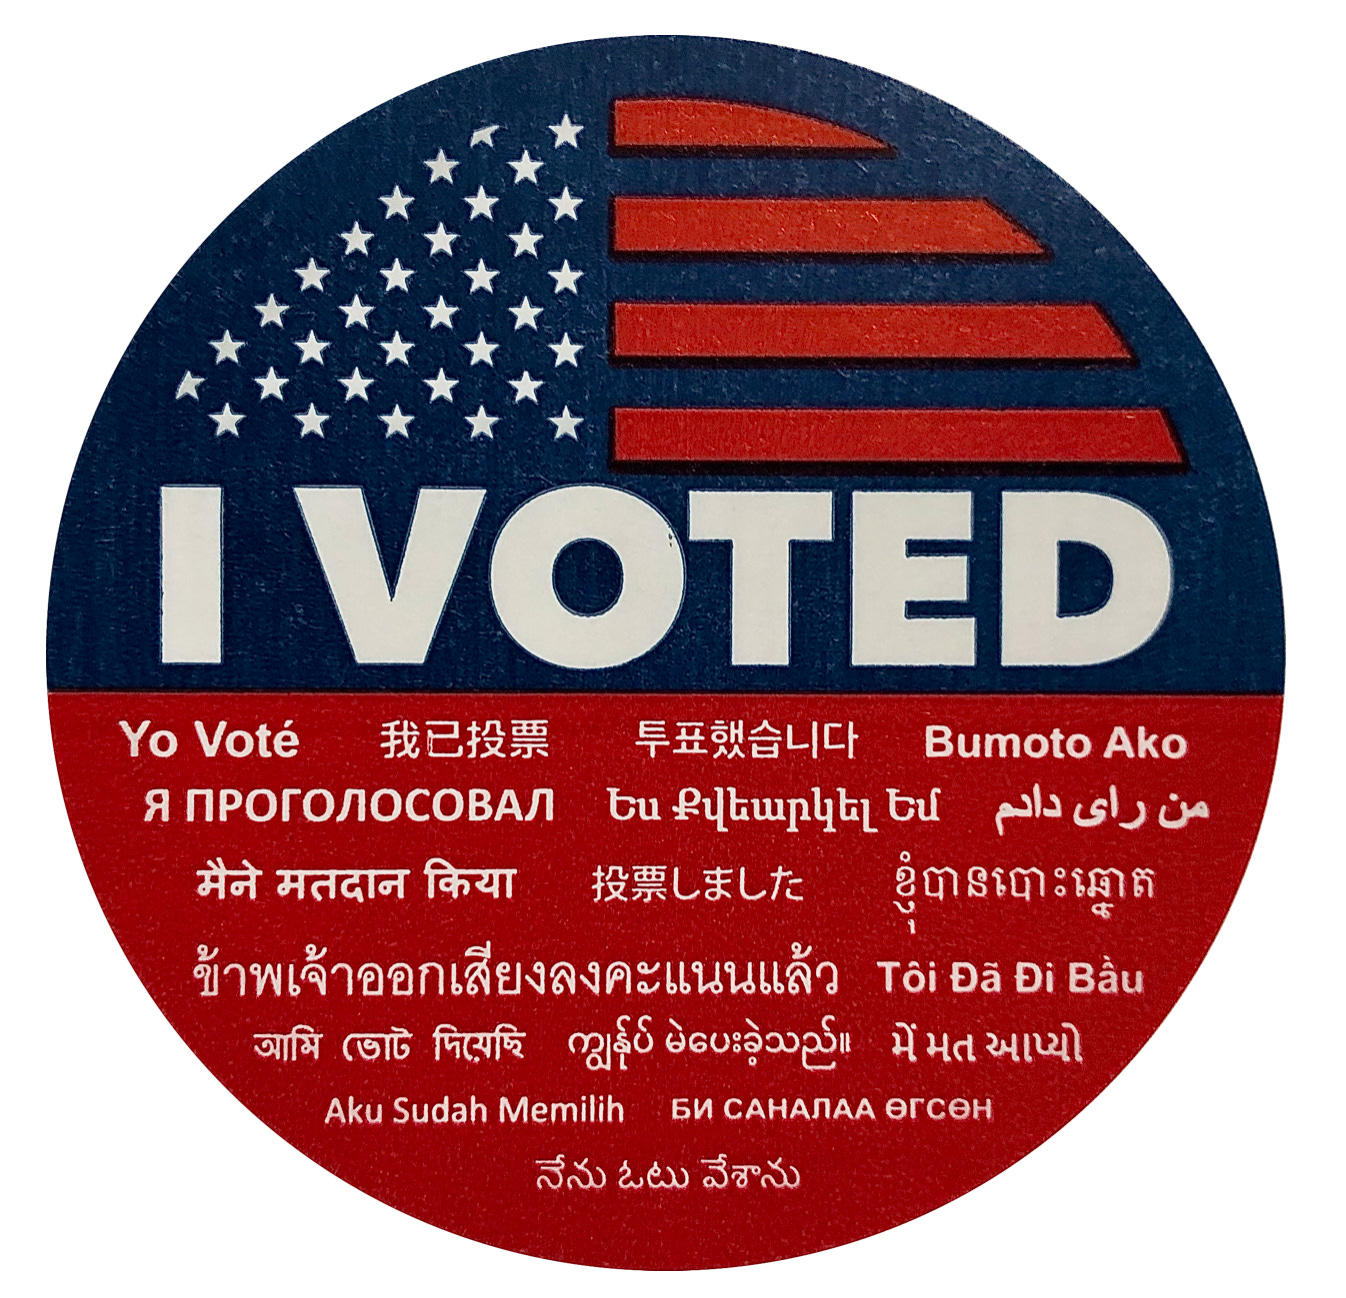 Red, white and blue "I Voted" sticker in English and 18 other languages